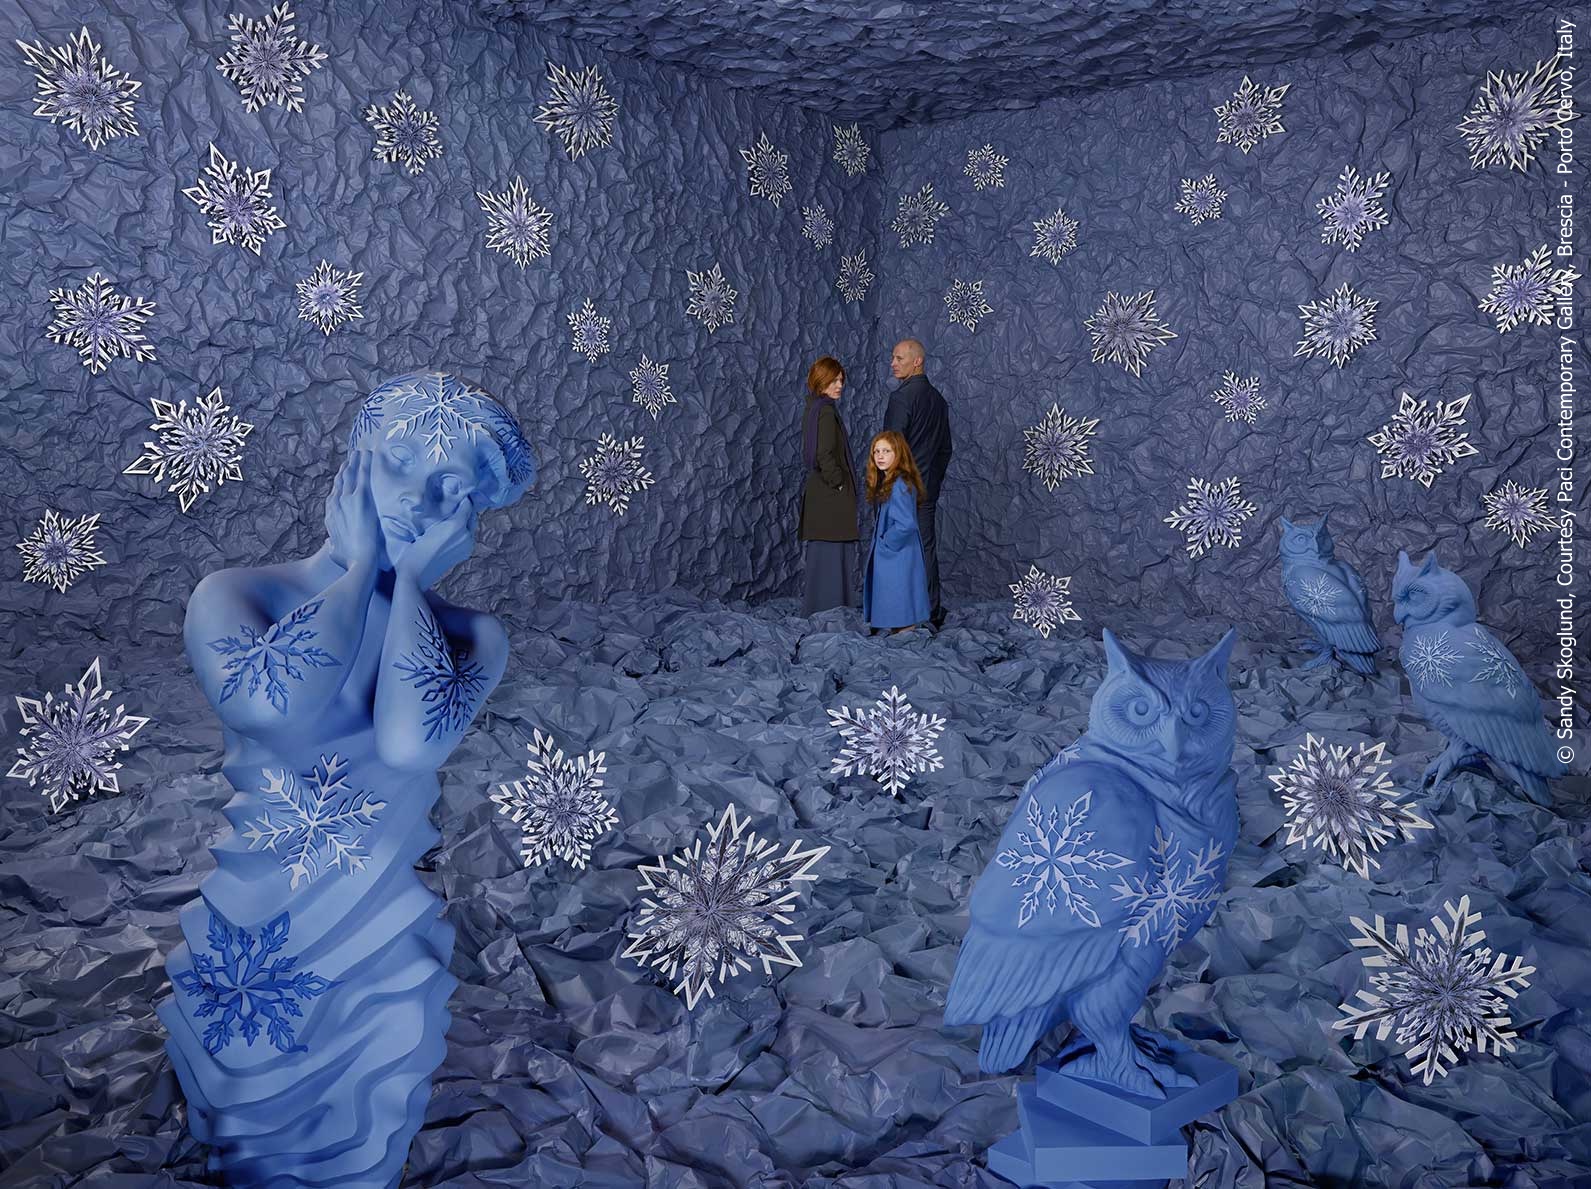 A surreal fine art photograph of a family in the corner of a room, coated in blue paper with snowflakes everywhere. In the foreground are figures of a young girl and some owls, also with snowflakes on them.